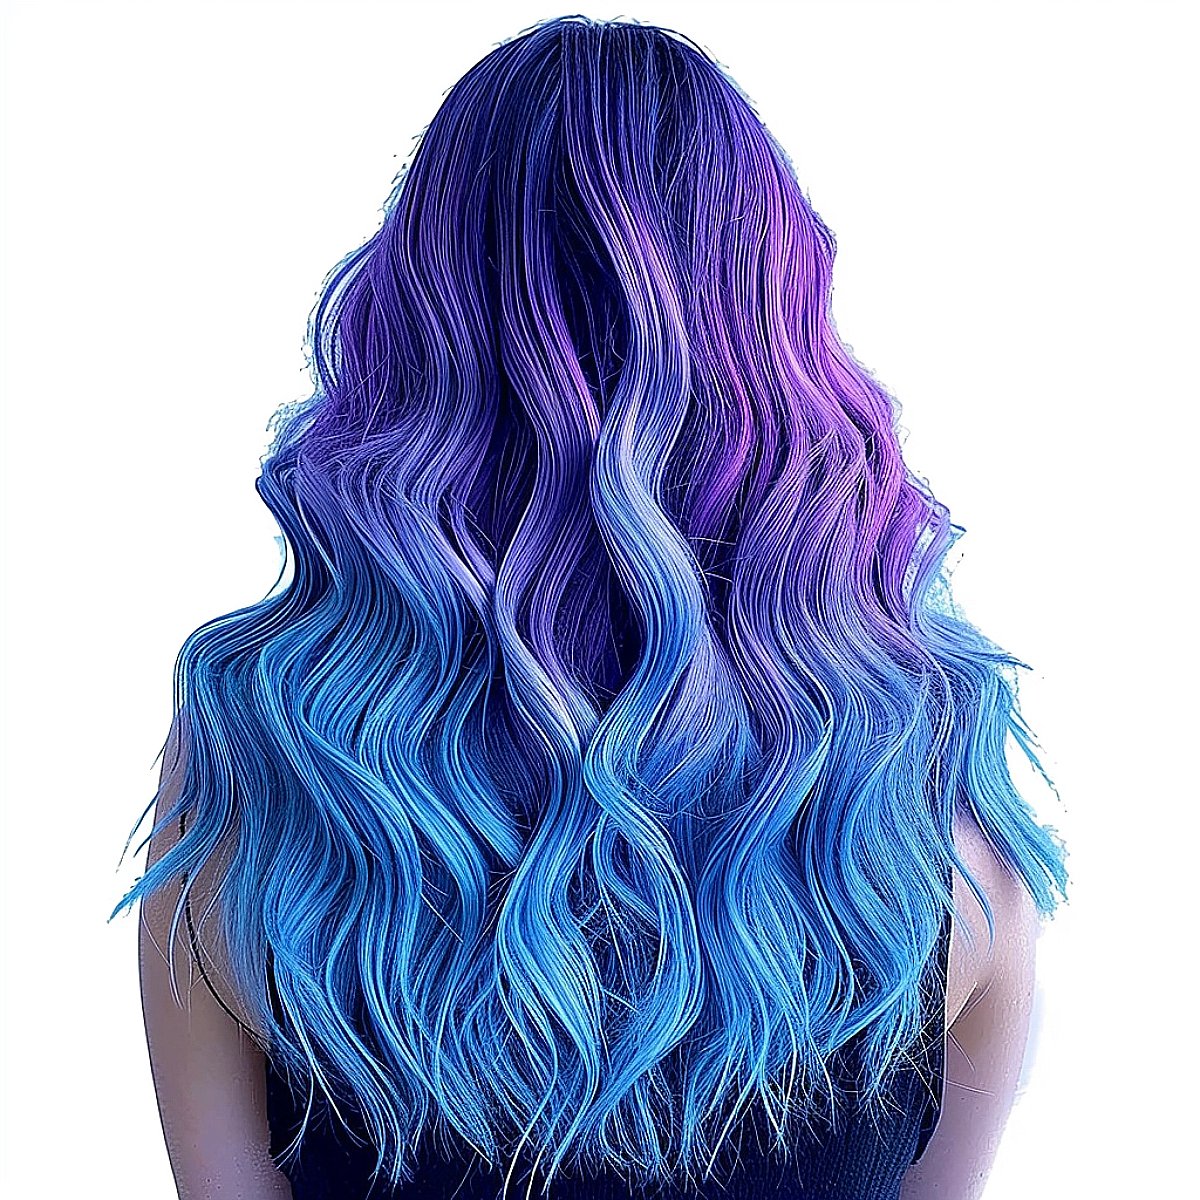 Pink and blue hair braids for girls - Picture of Golden Touch